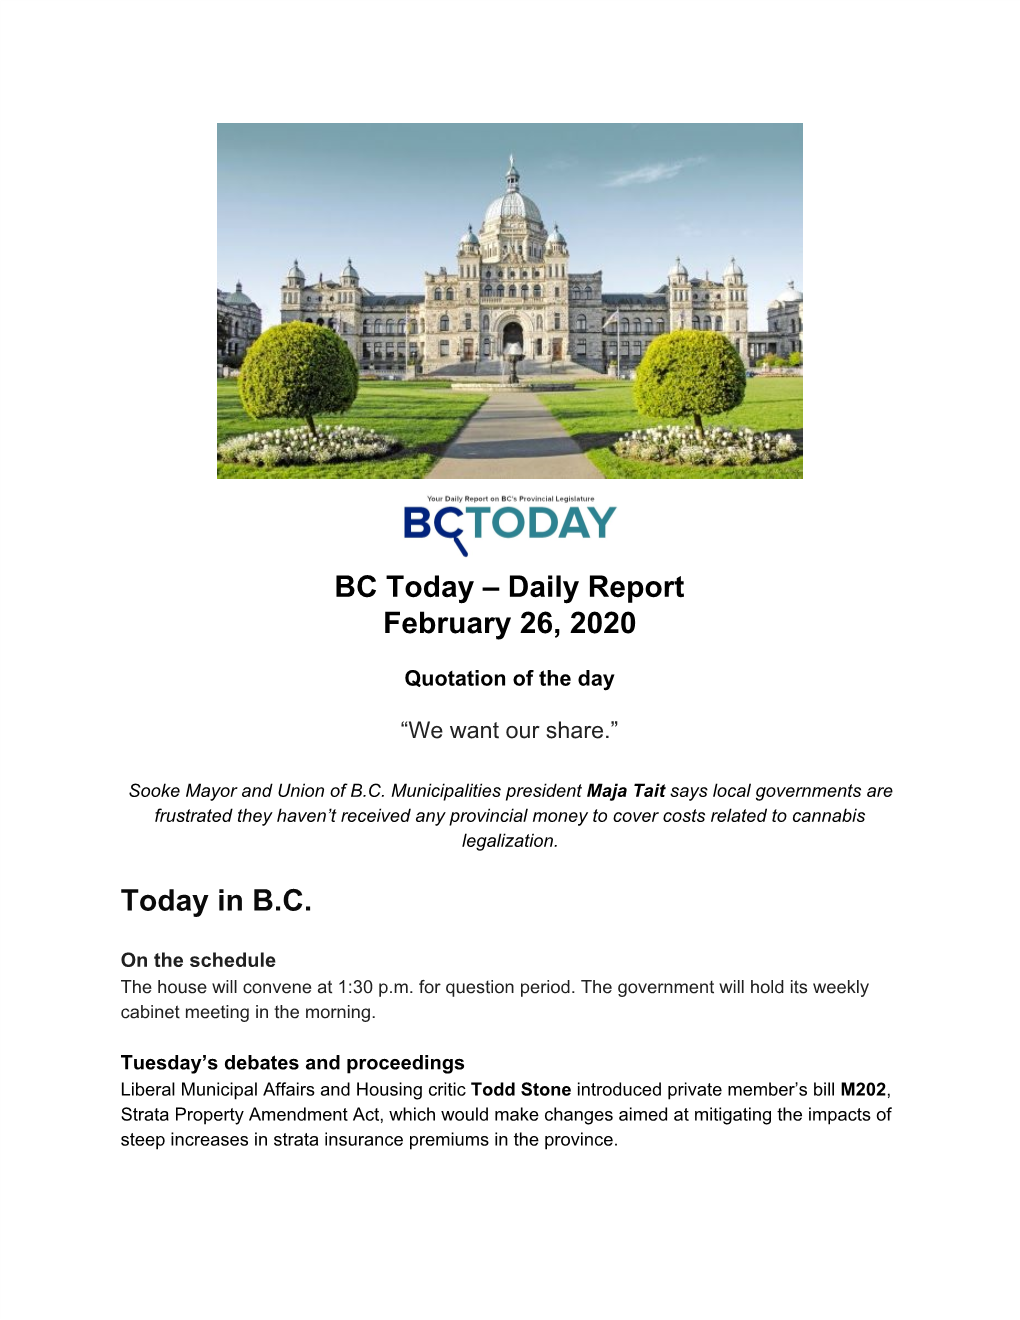 Daily Report February 26, 2020 Today in BC